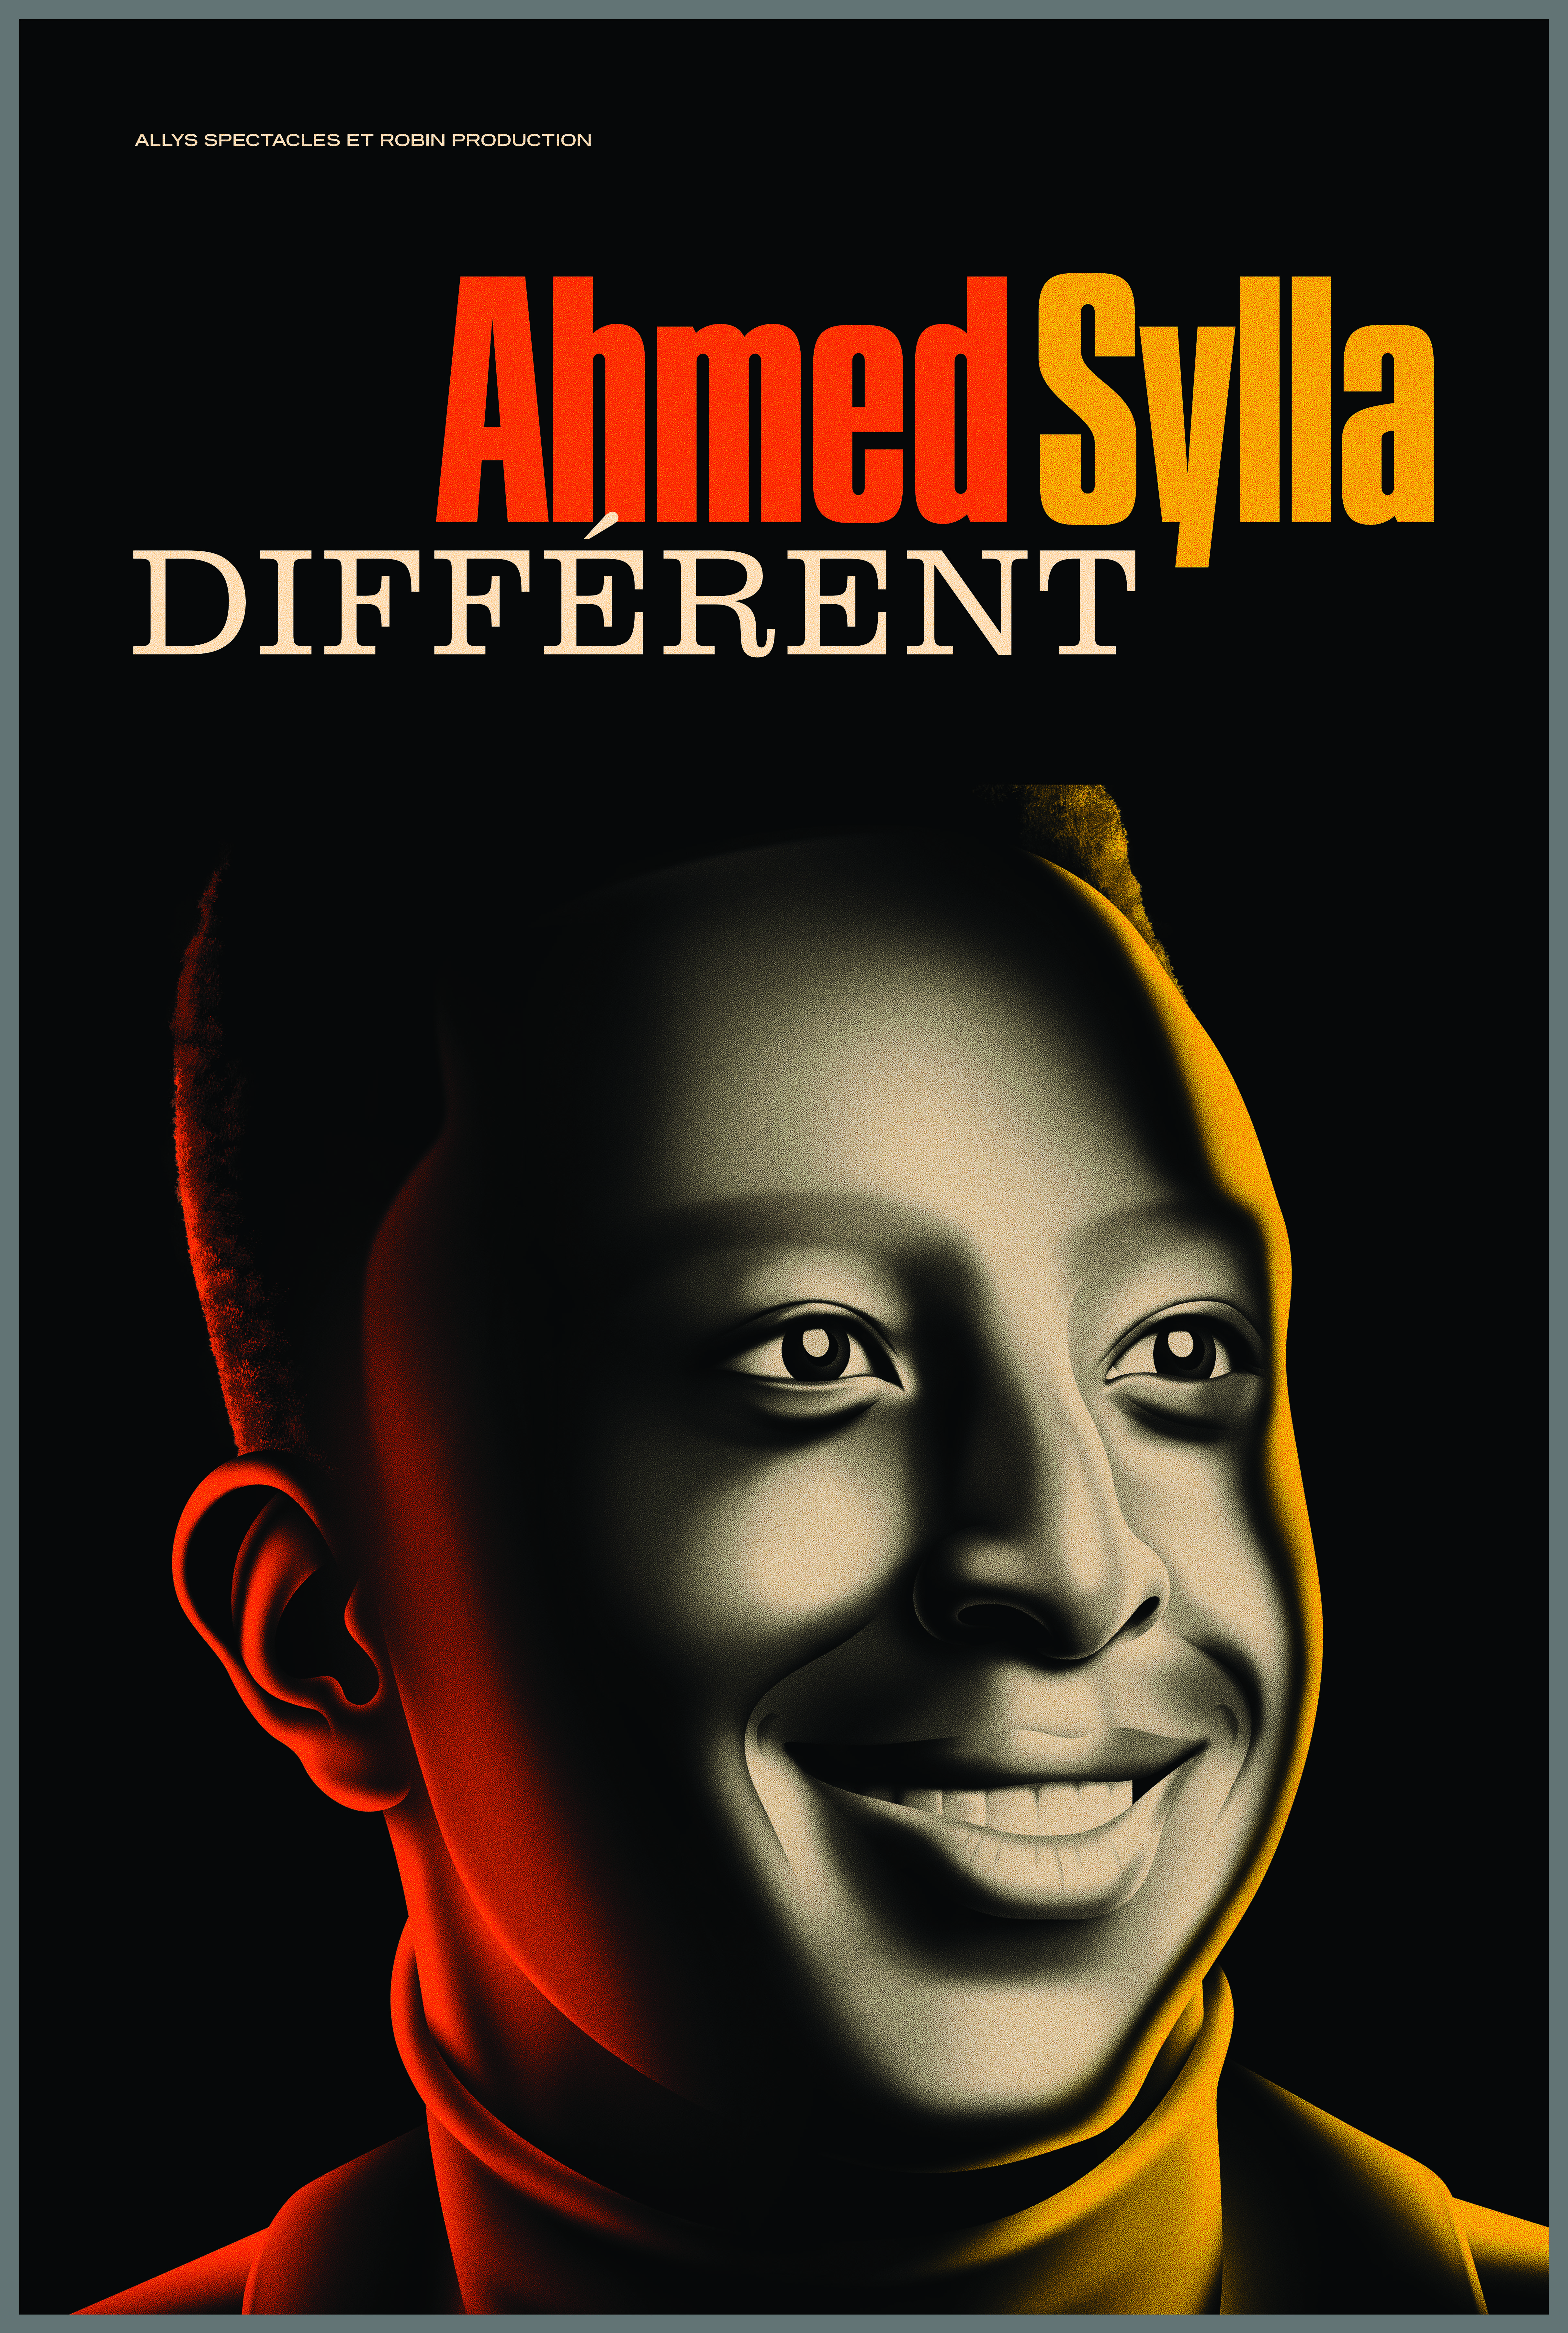 Ahmed Sylla_DIFFERENT